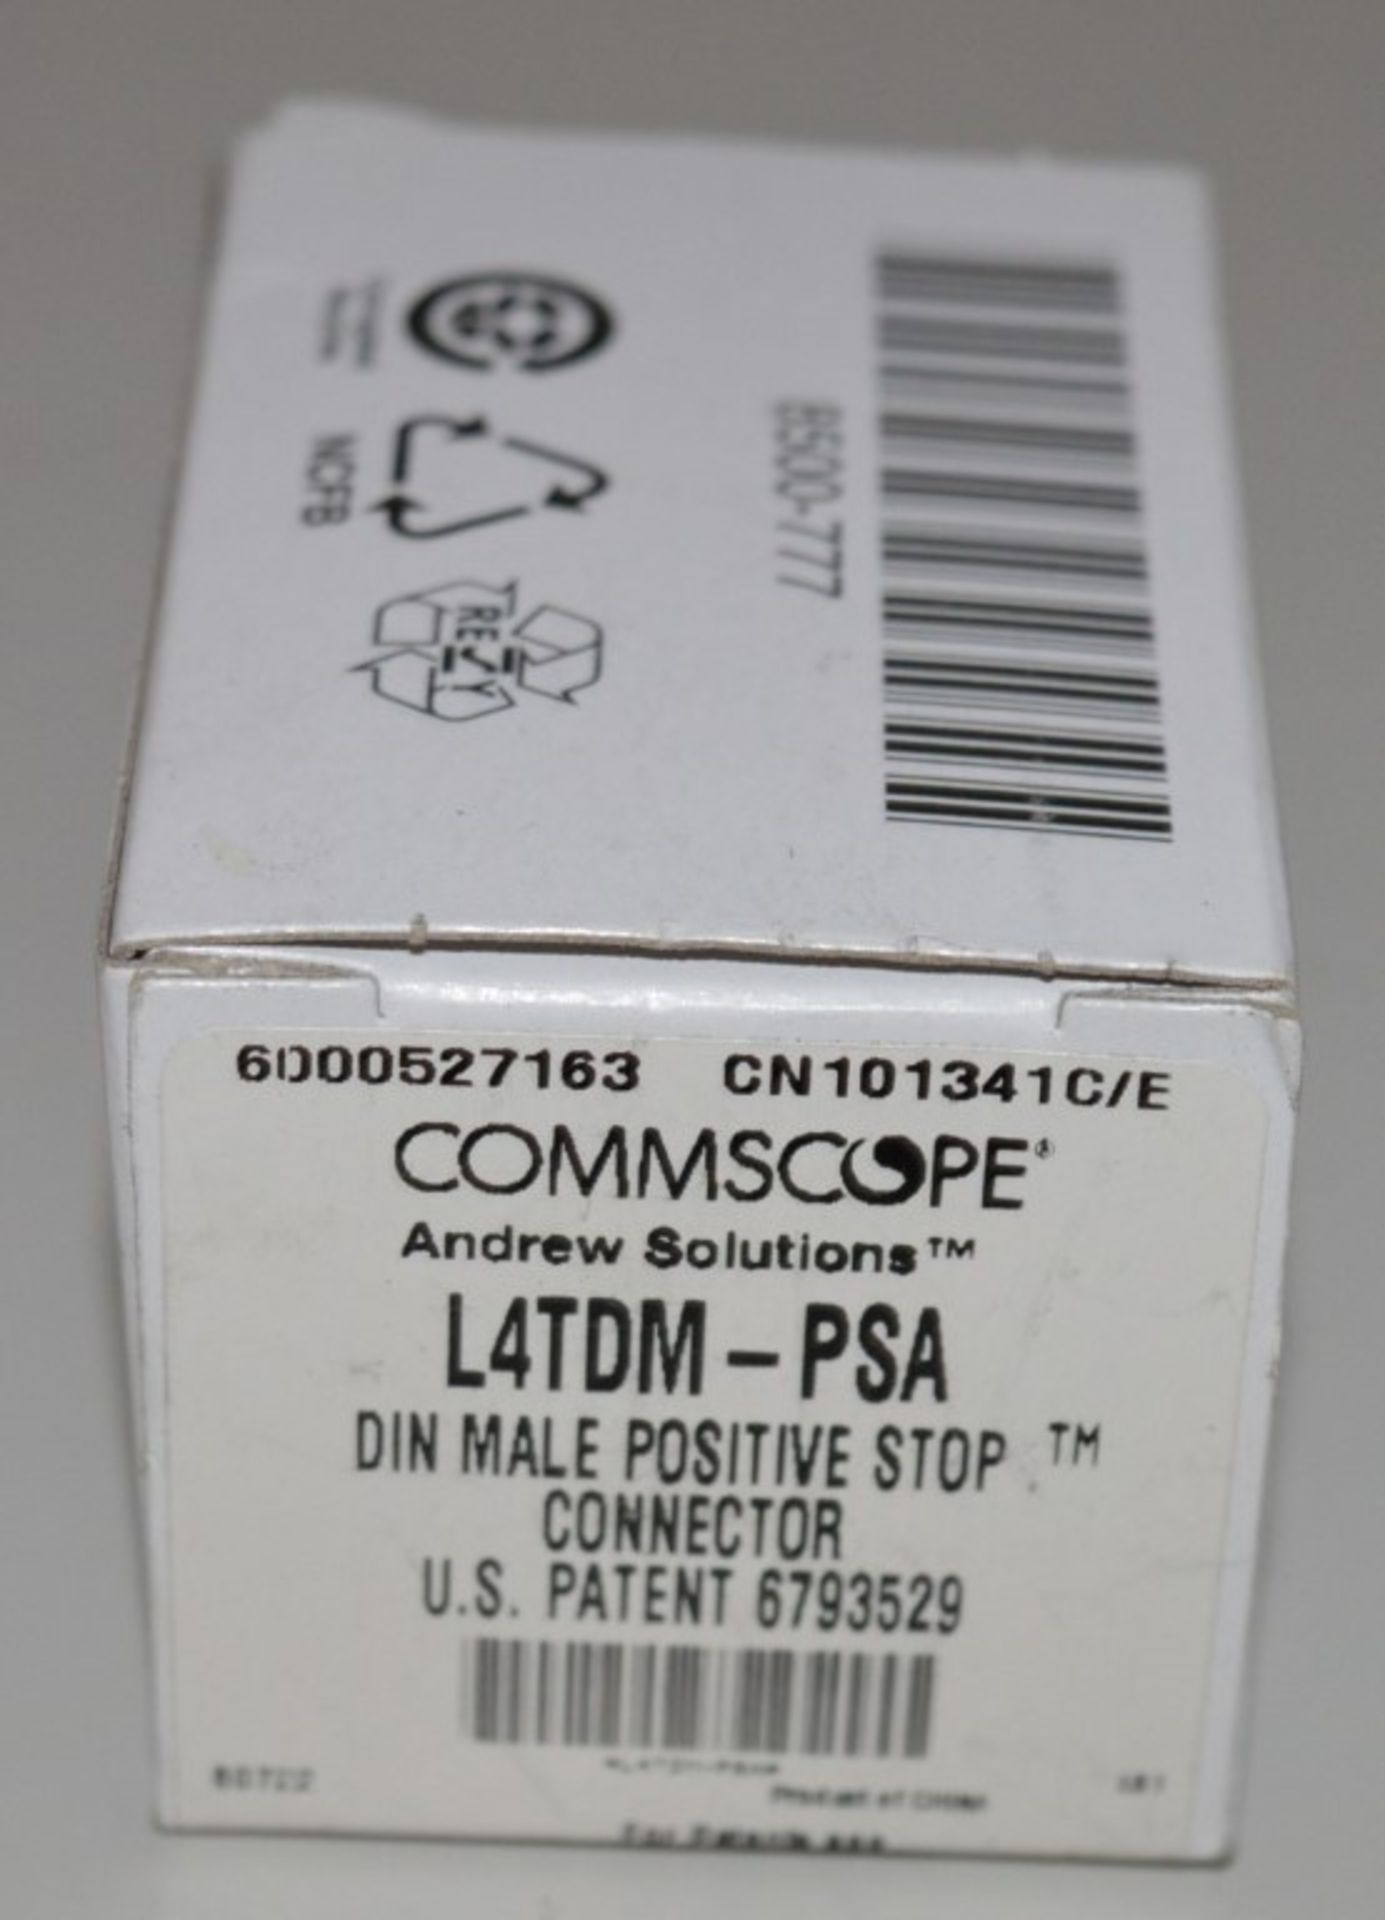 18 x Commscope L4TDM-PSA Din Male Positive Stop Connectors - Andrew Solutions - Brand New Boxed - Image 2 of 8